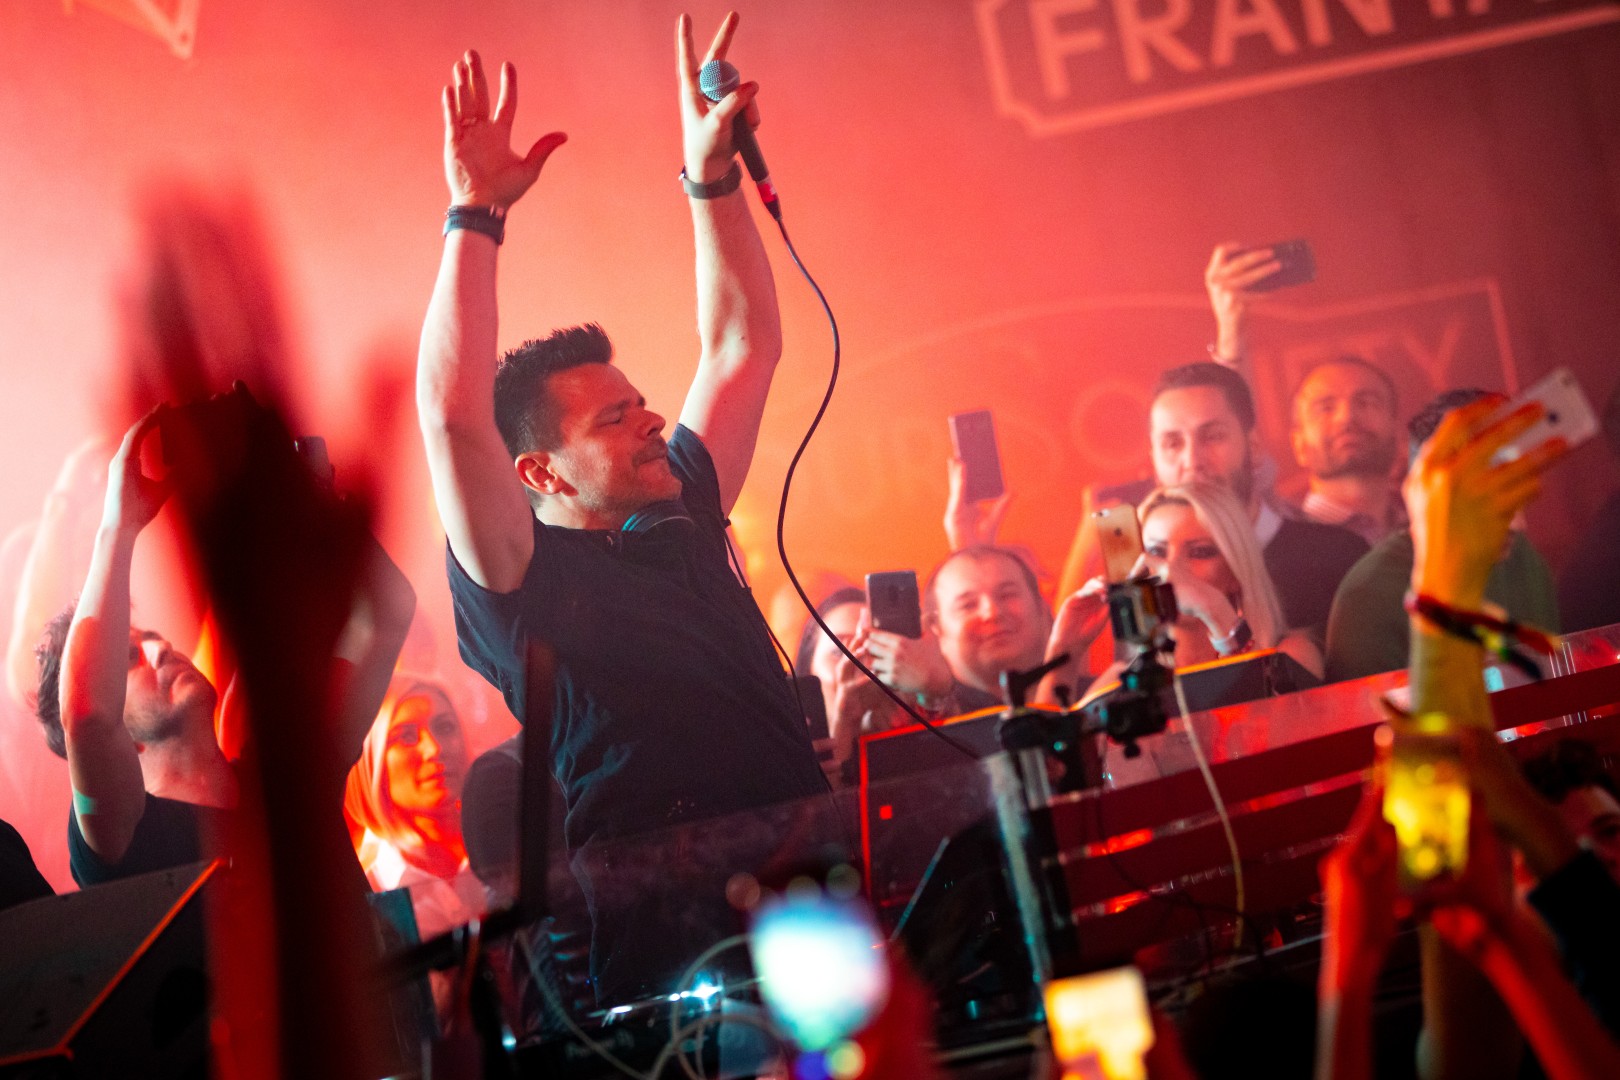 ATB at Fratelli Studios in Bucharest on November 18, 2018 (0c92106aa6)